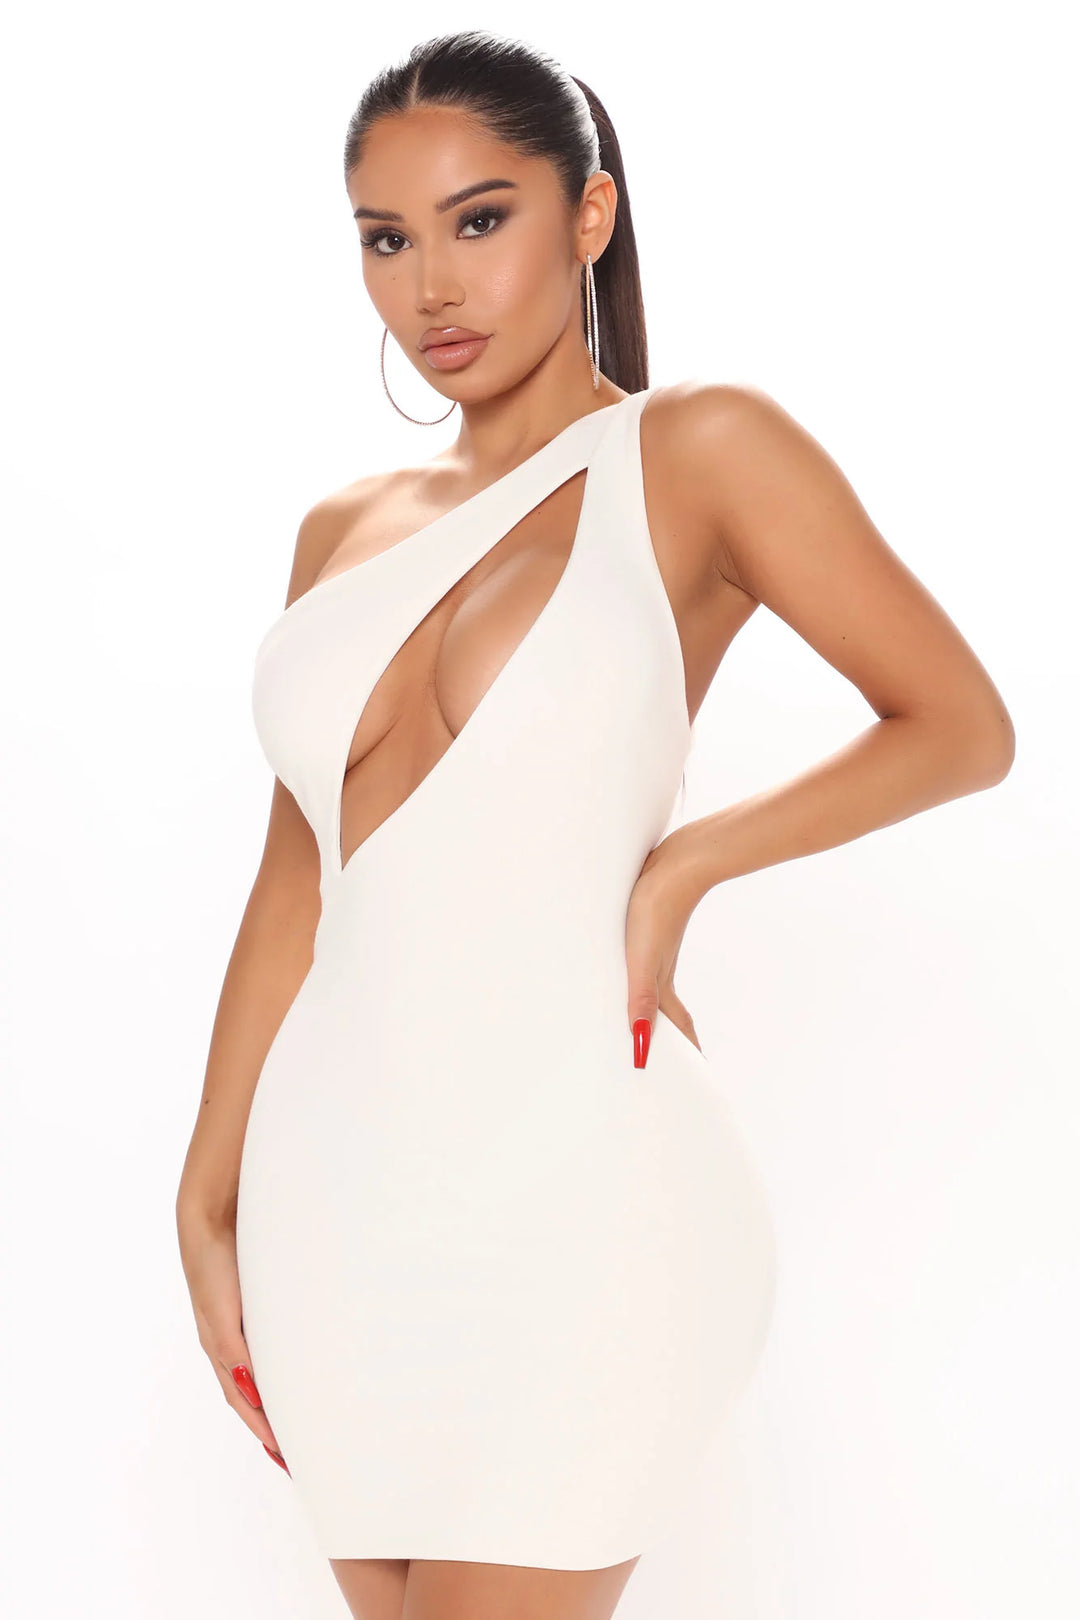 Kylie jenner inspired cut out mini dress